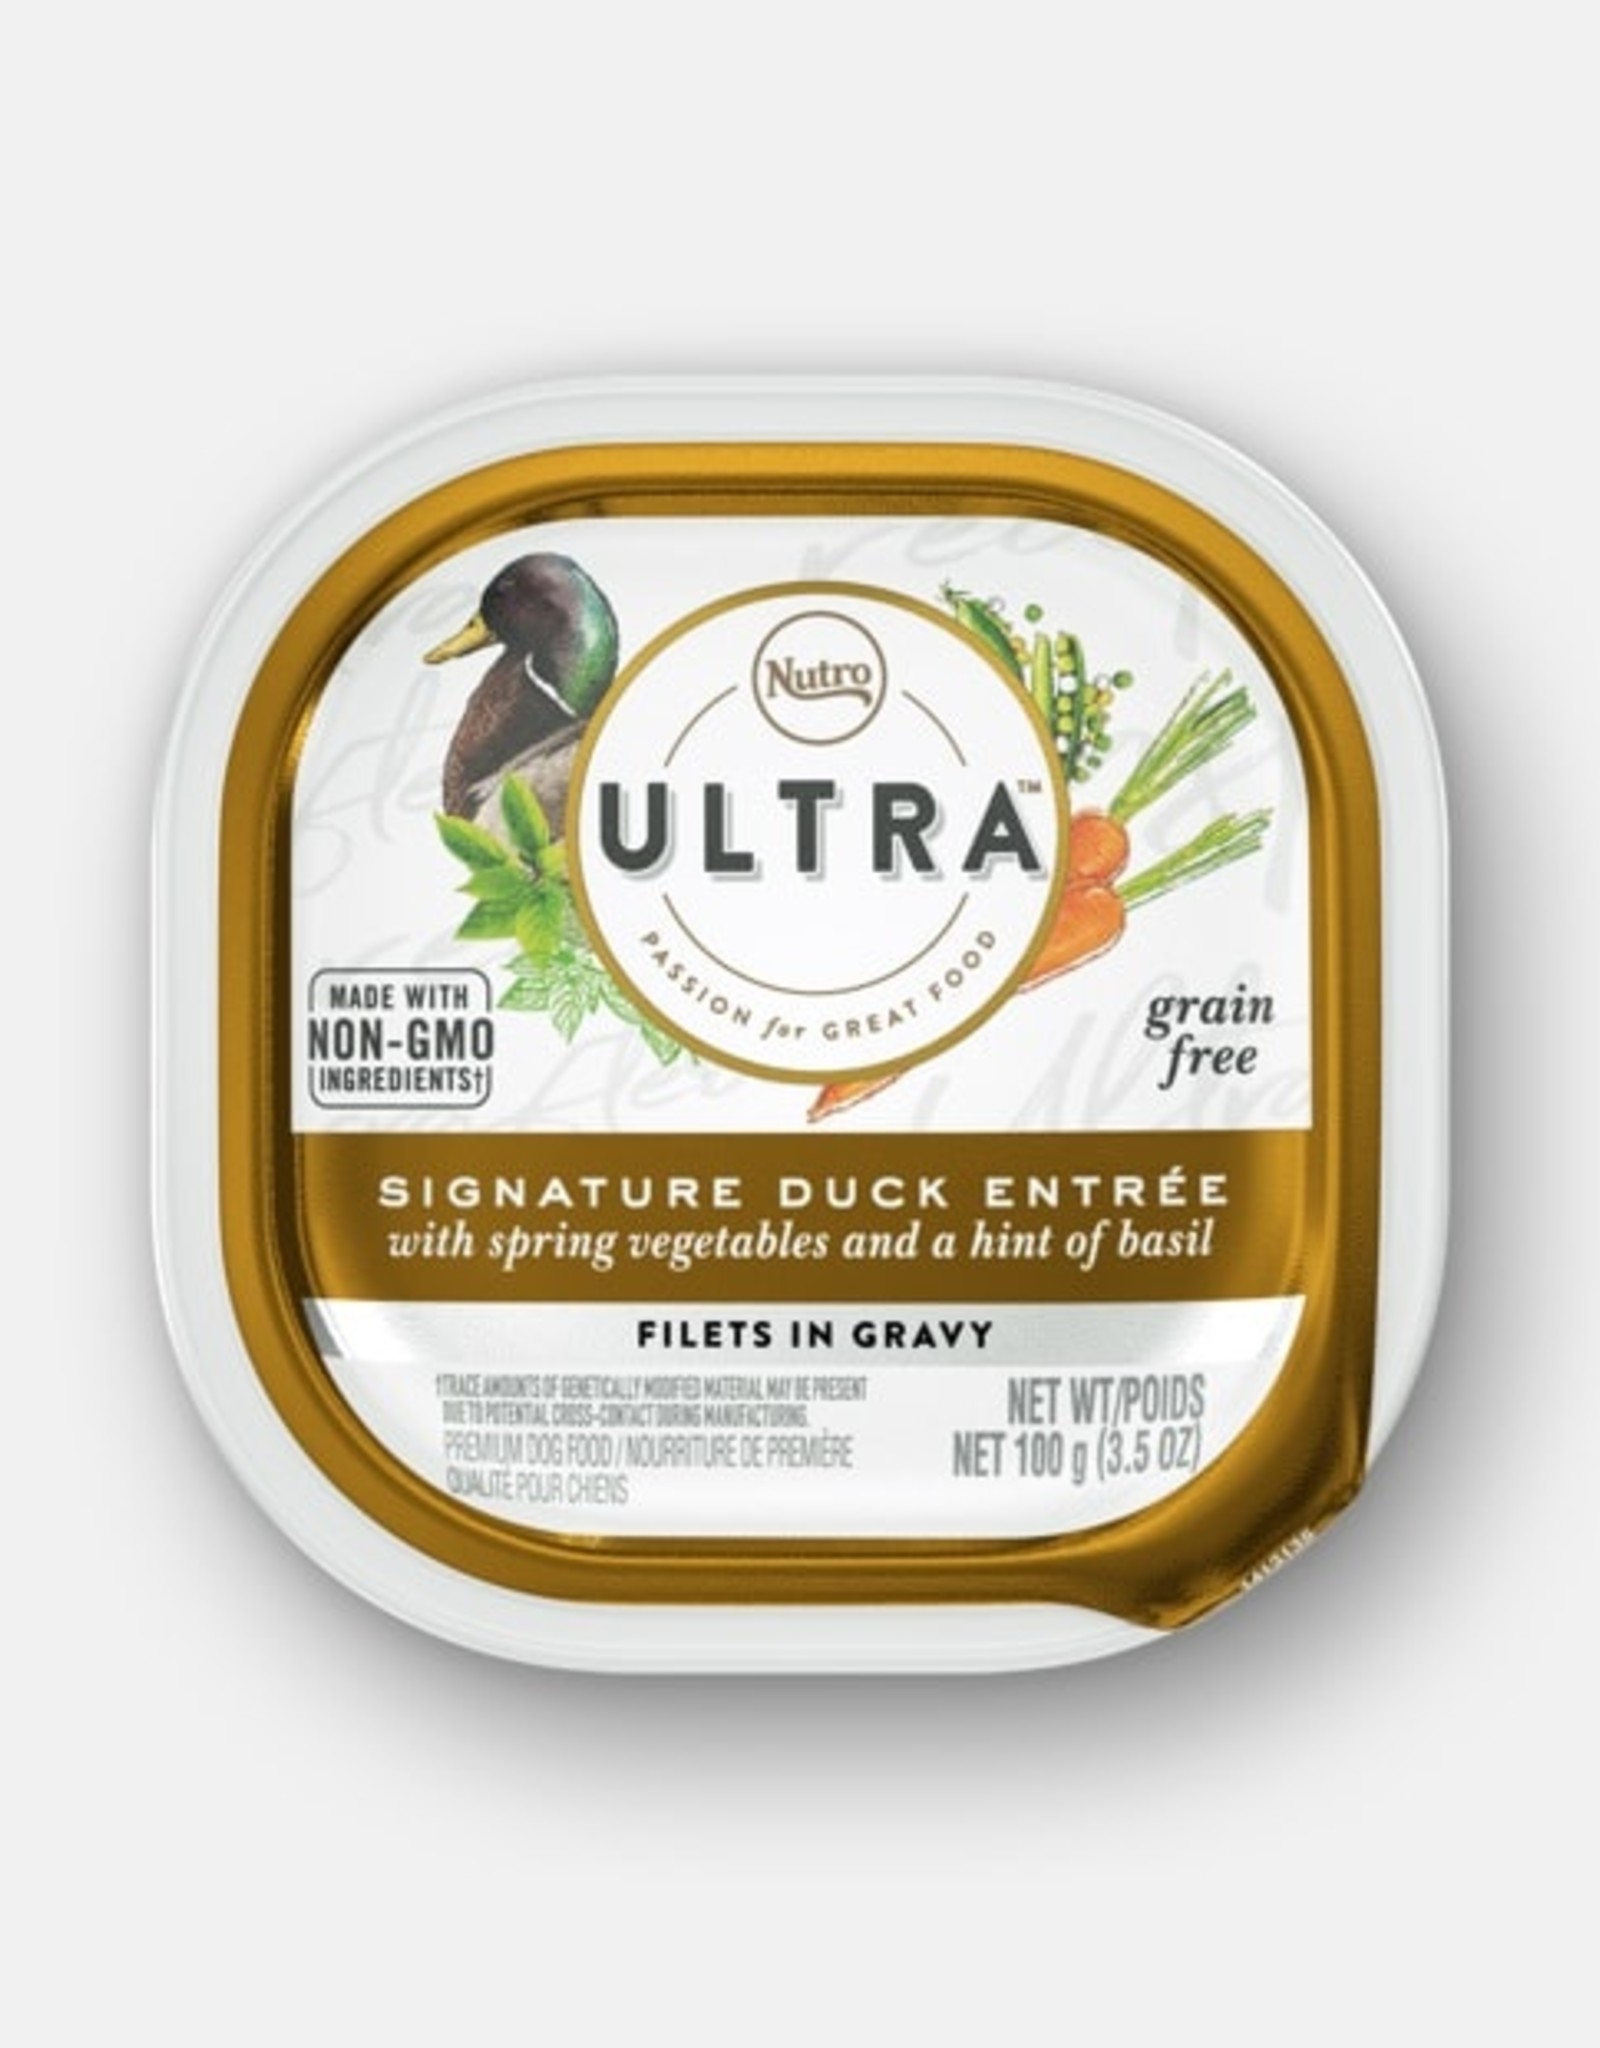 NUTRO PRODUCTS  INC. NUTRO ULTRA GRAIN FREE SIGNATURE DUCK ENTREE 3.5OZ TRAY CASE OF 24